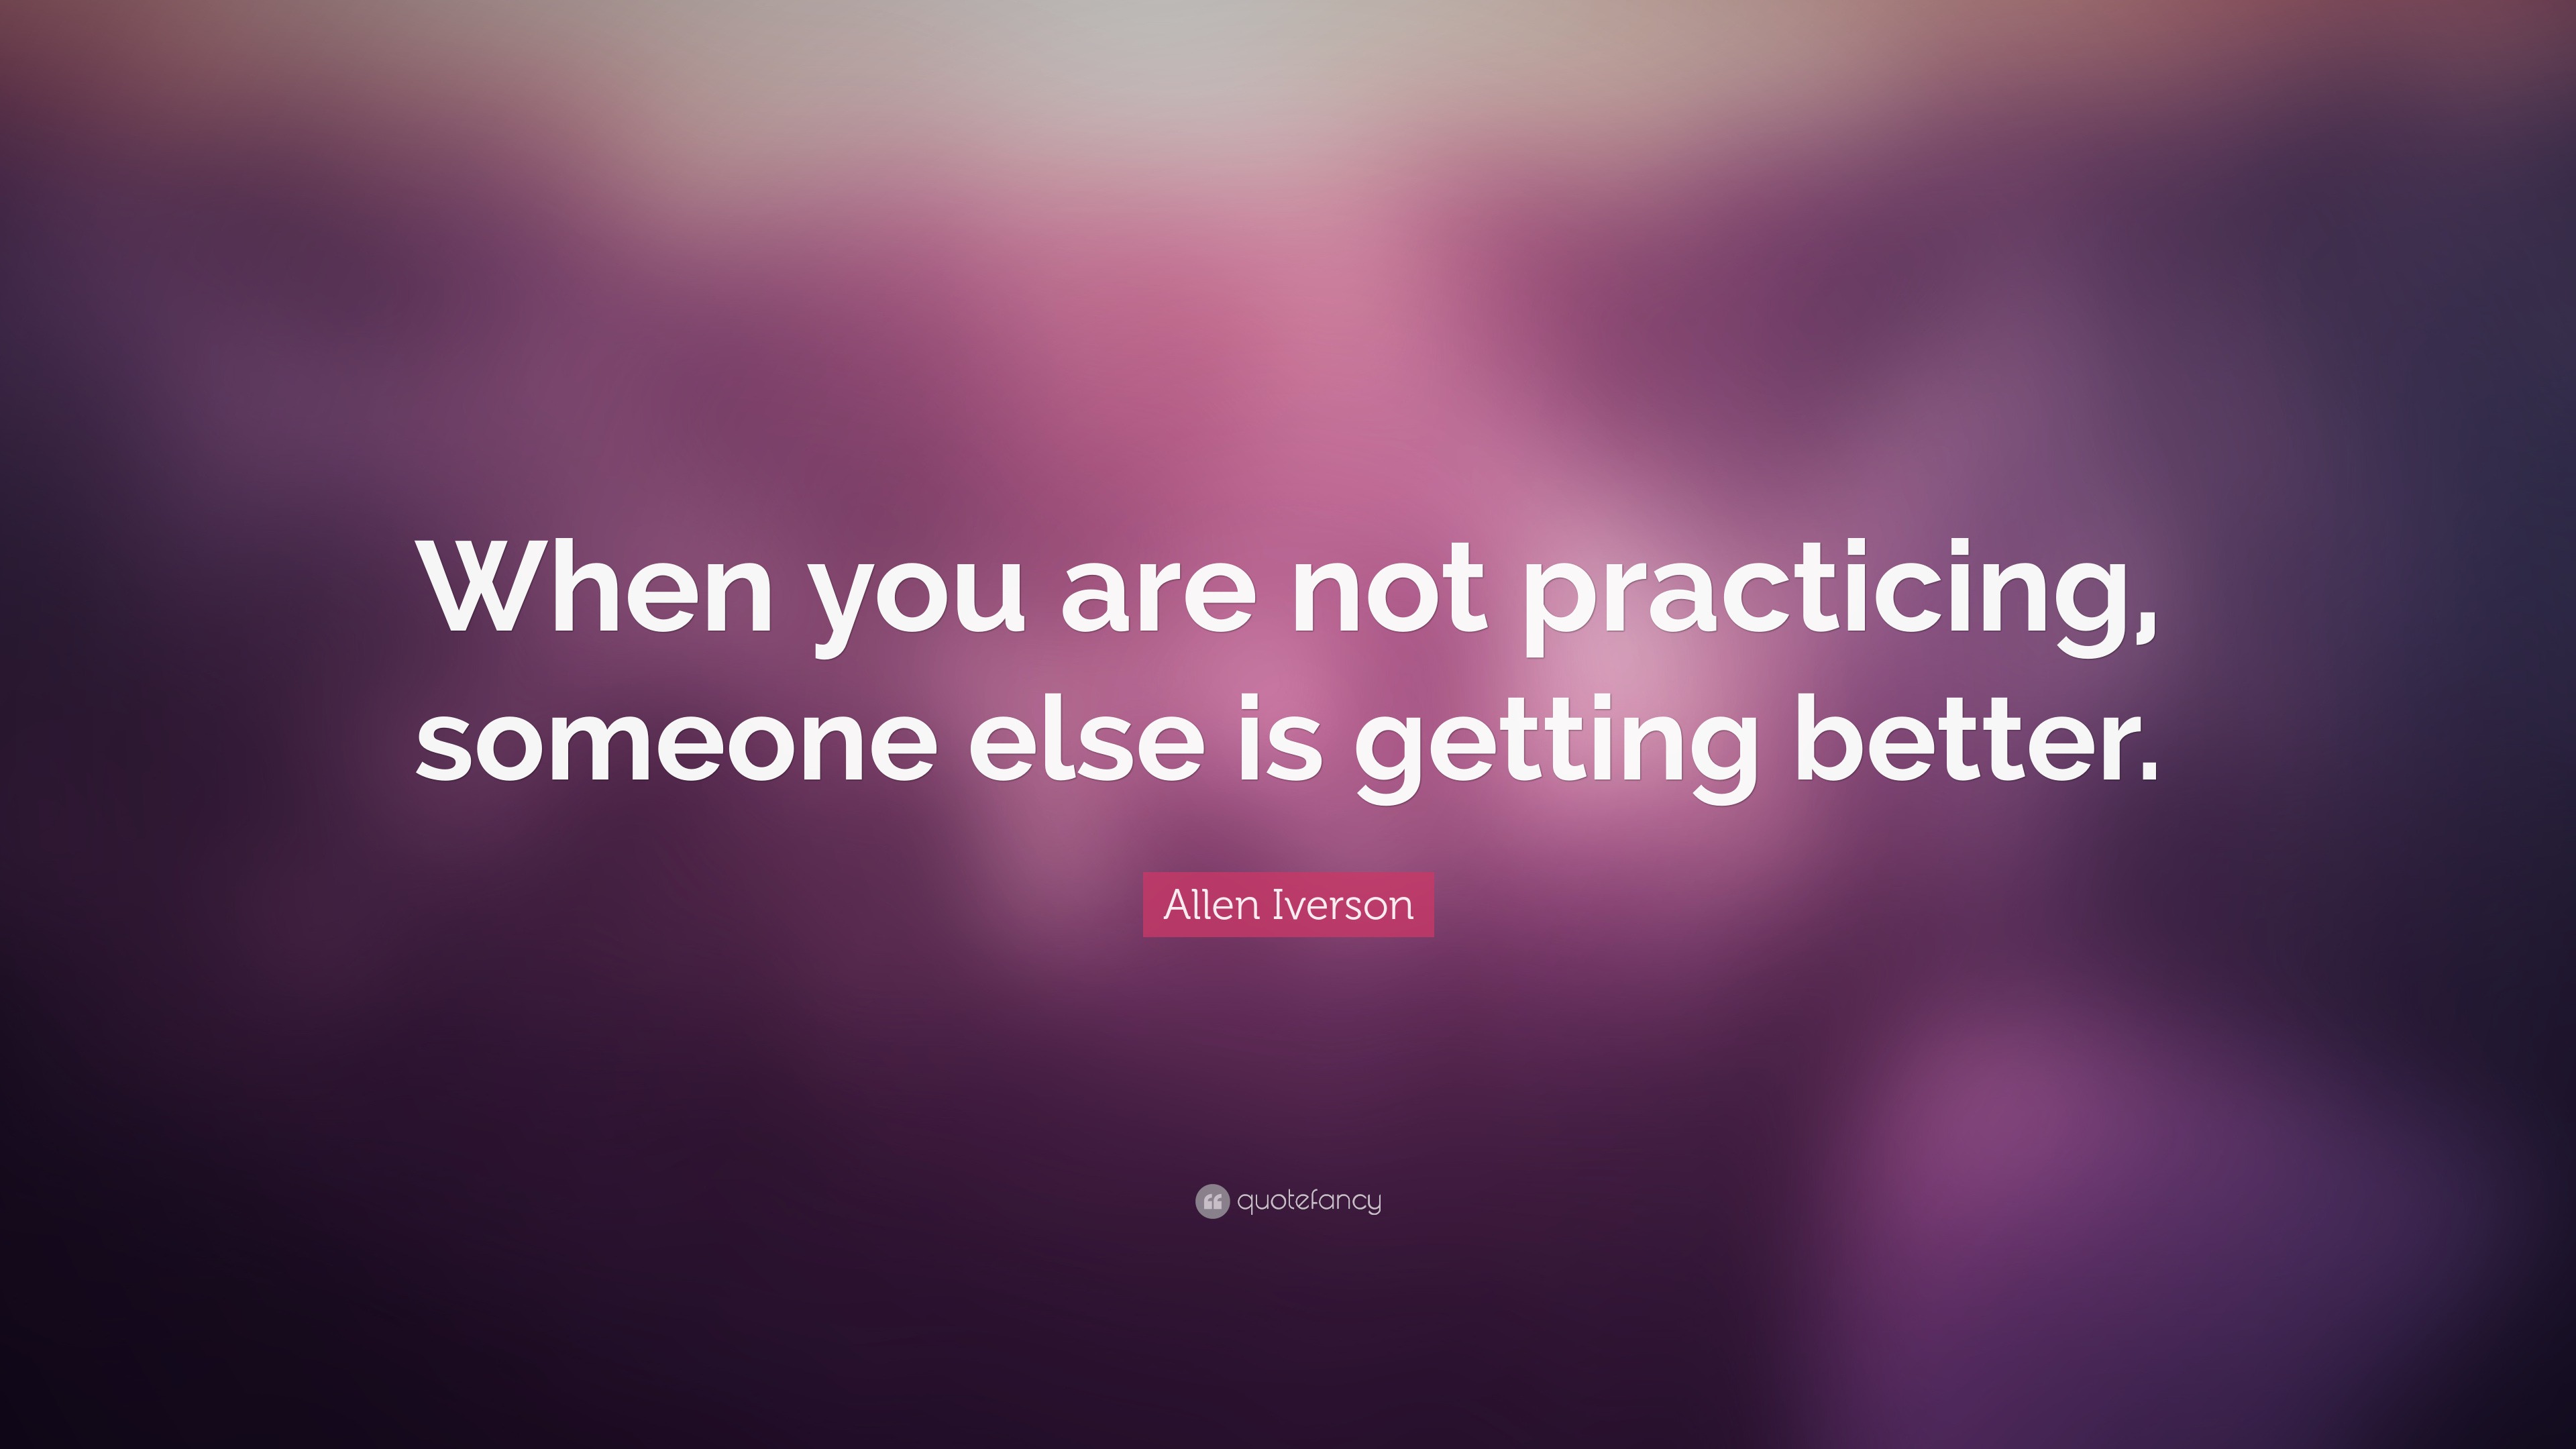 Allen Iverson Quote: “When you are not practicing, someone else is ...